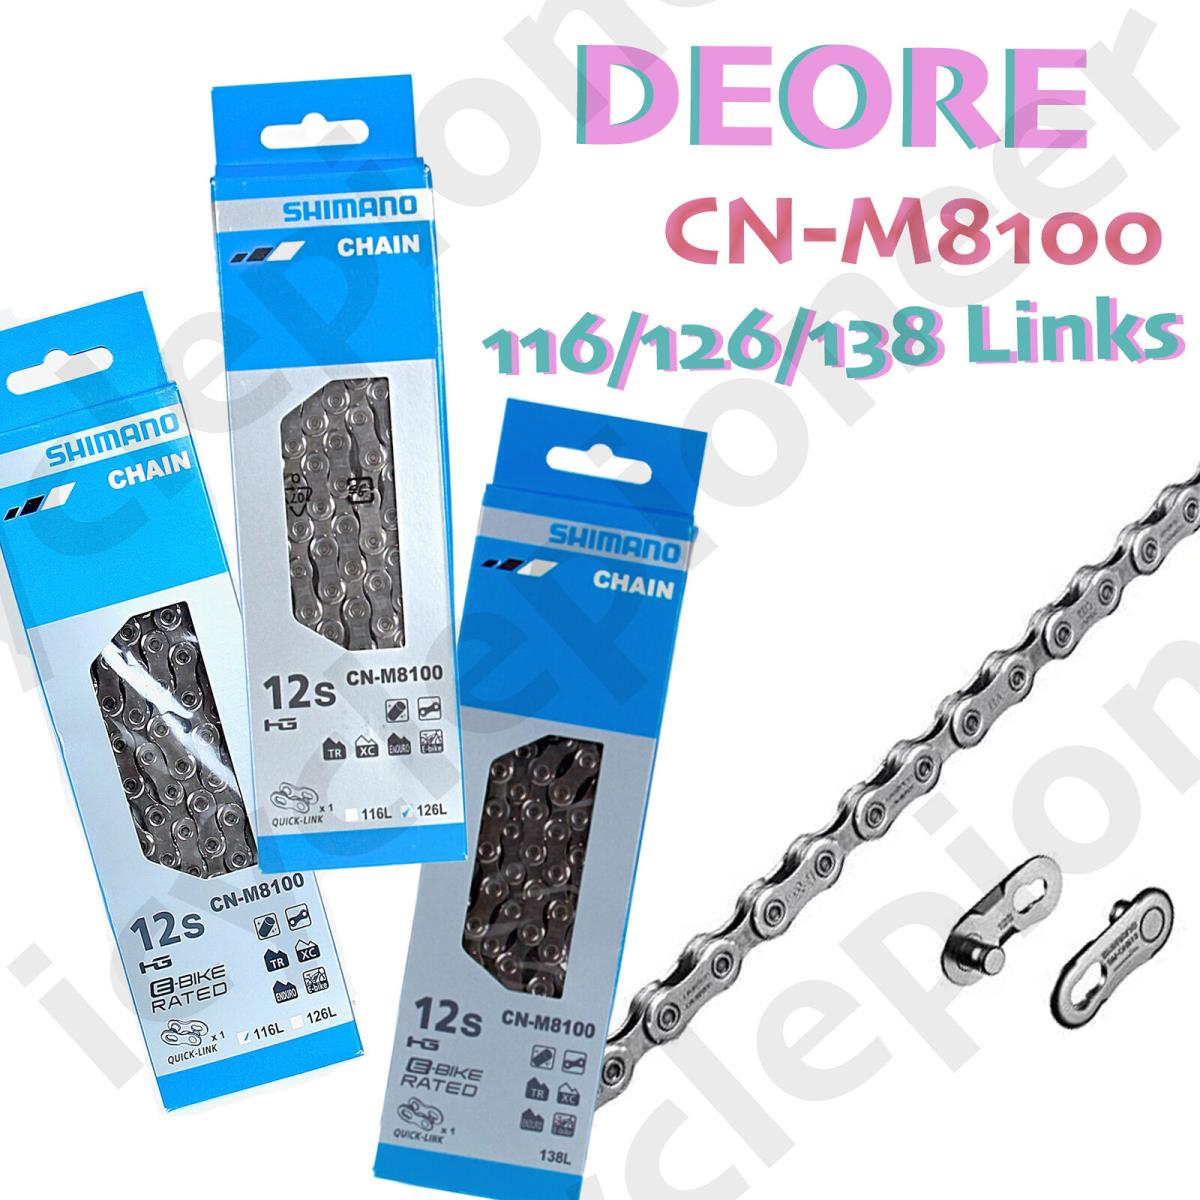 Shimano Deore XT CN-M8100 12 Spd Chain with Quick-link 116L/126L/138L